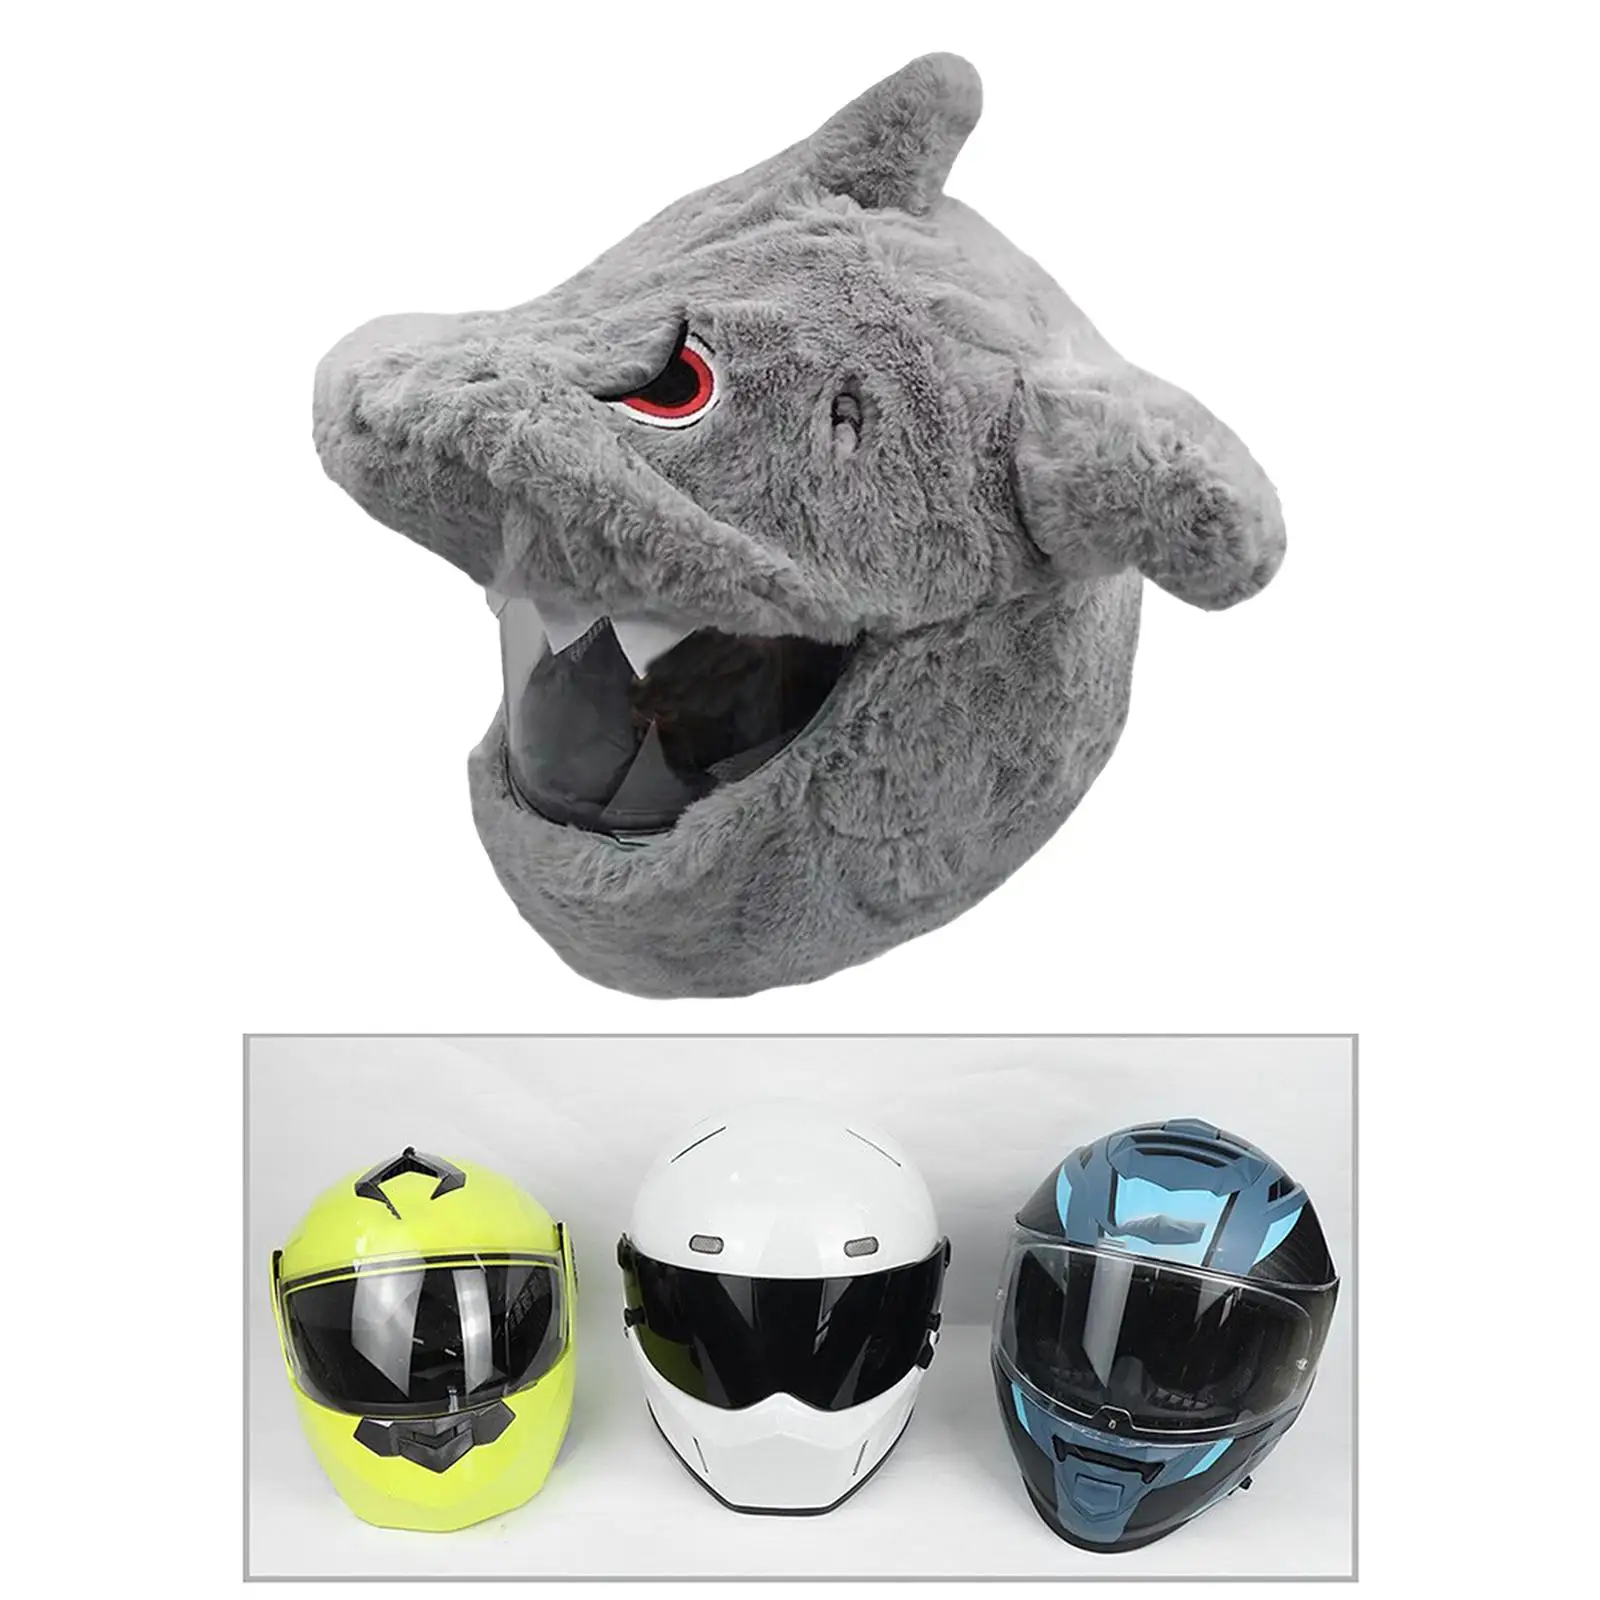 Motorbike Helmet Cover Personalized Fun Riding Gear Plush Animal Helmet Covers for Outdoor Riding Motorcycle Helmet Women